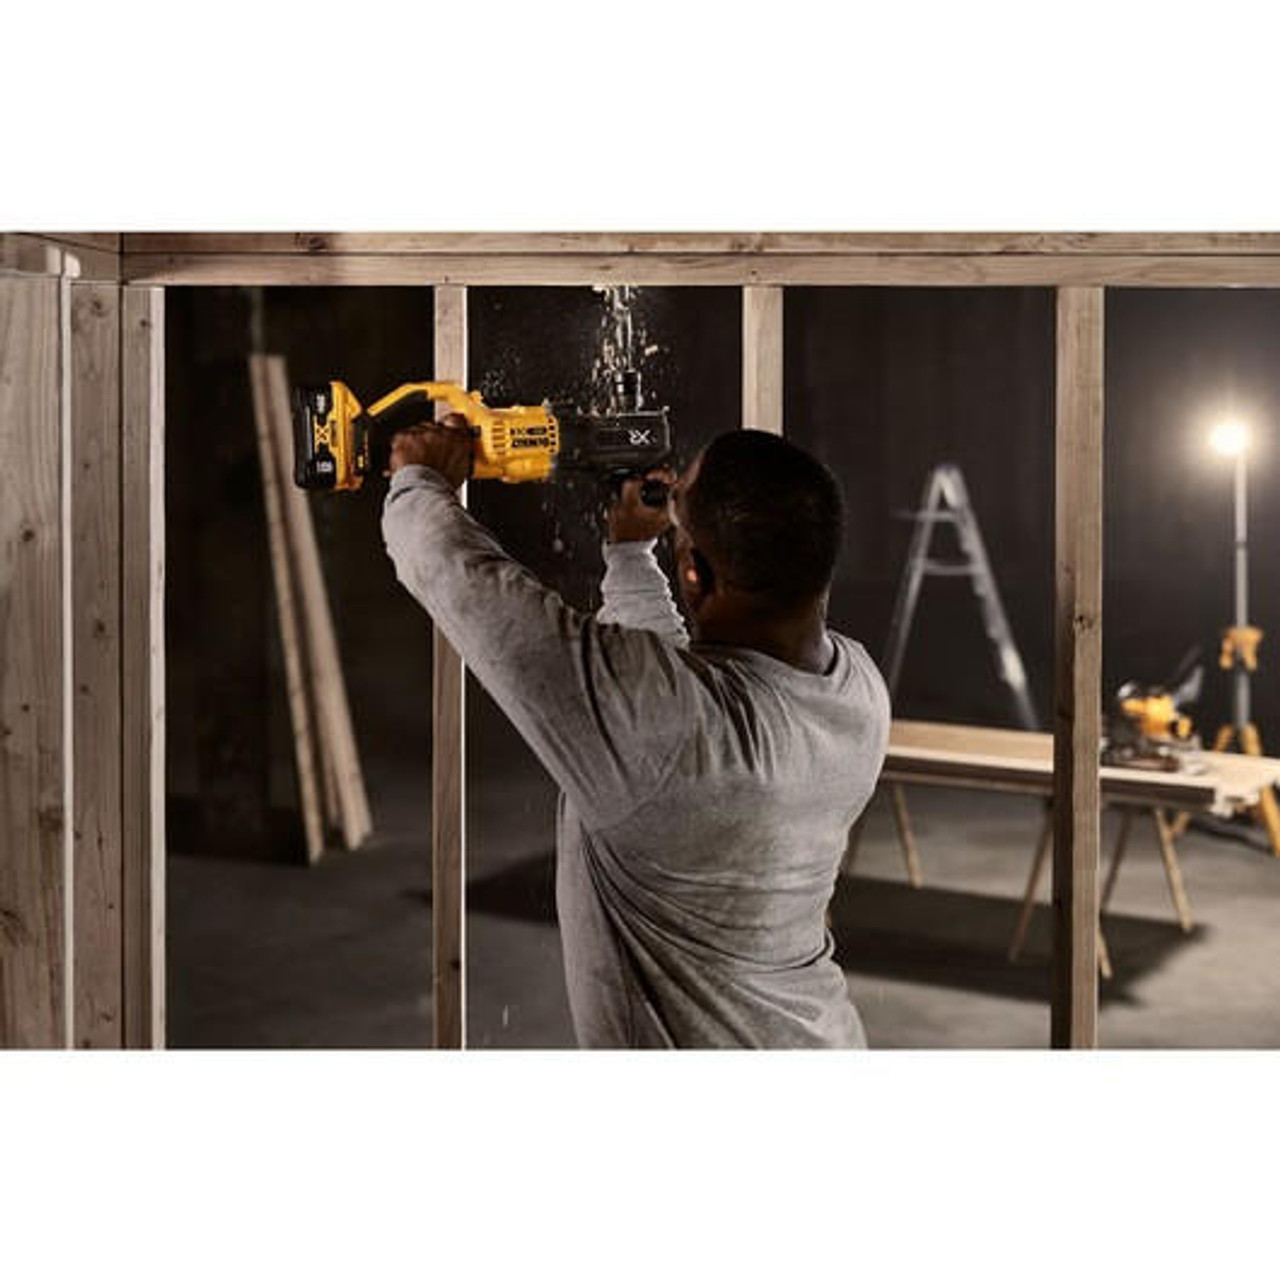 Dewalt 20V MAX* XRÂ® Brushless Cordless 7/16 in. Compact Quick Change Stud and Joist Drill with POWER DETECTâ„¢ (Tool Only) DCD443B 